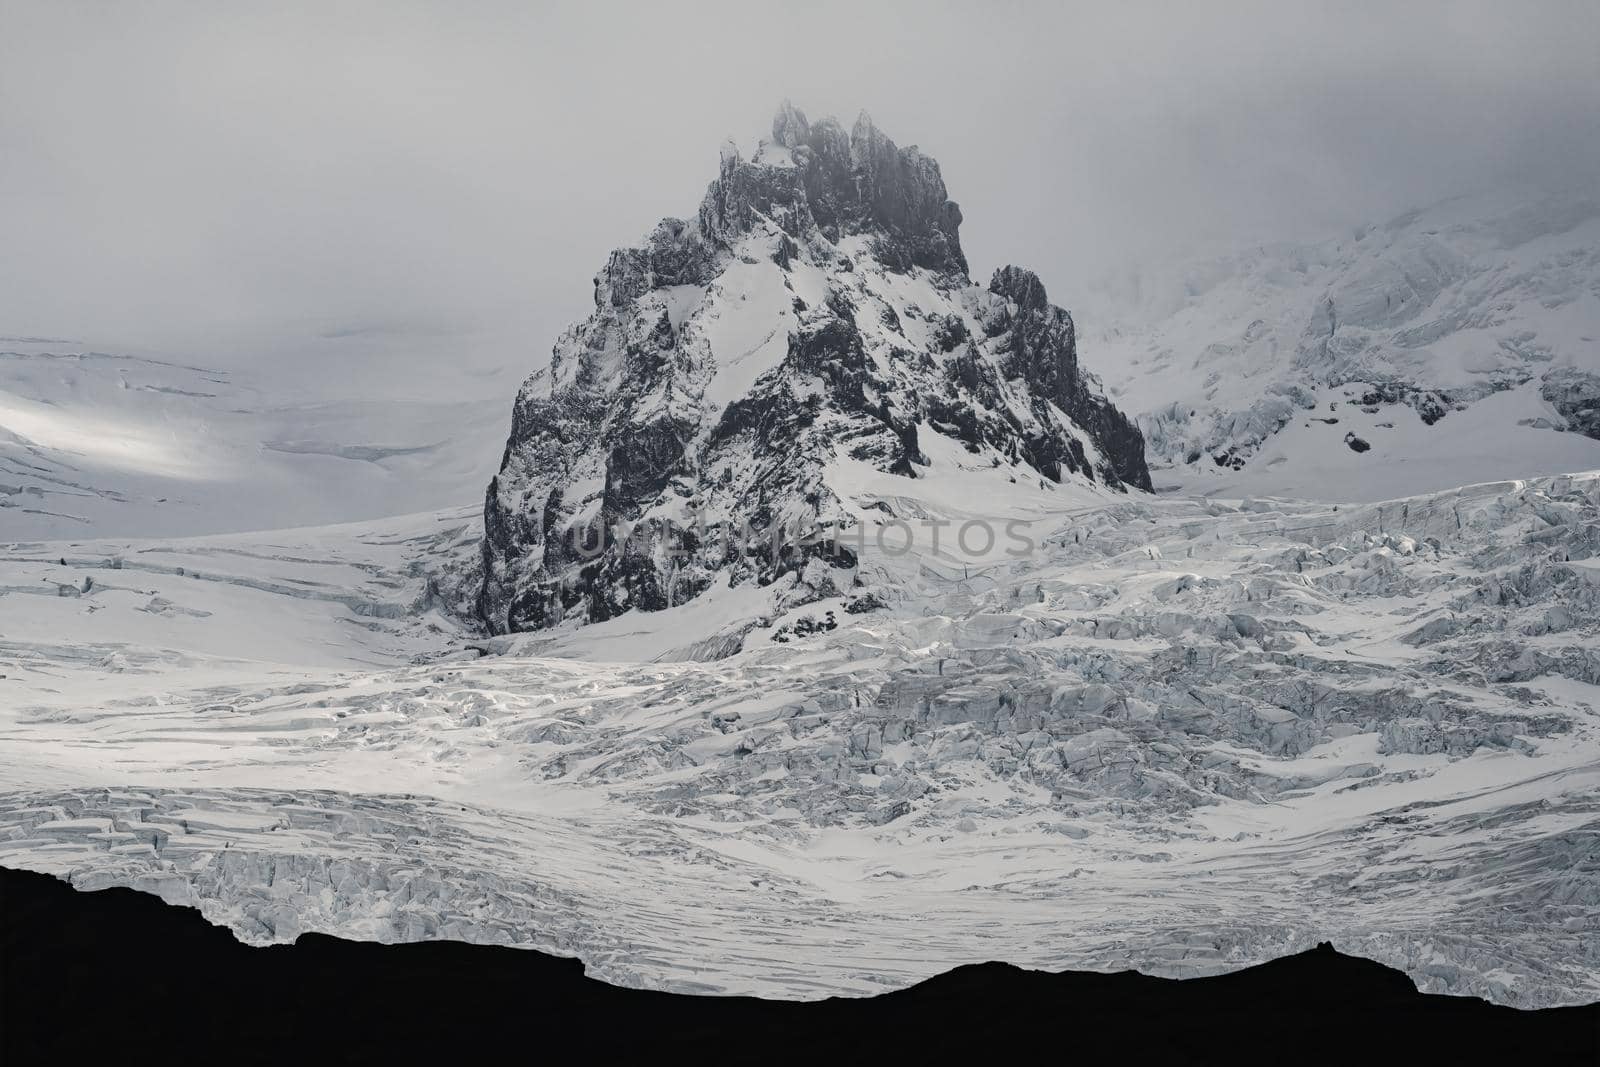 Spectacular glacier and sharp mountain peak in the middle by FerradalFCG